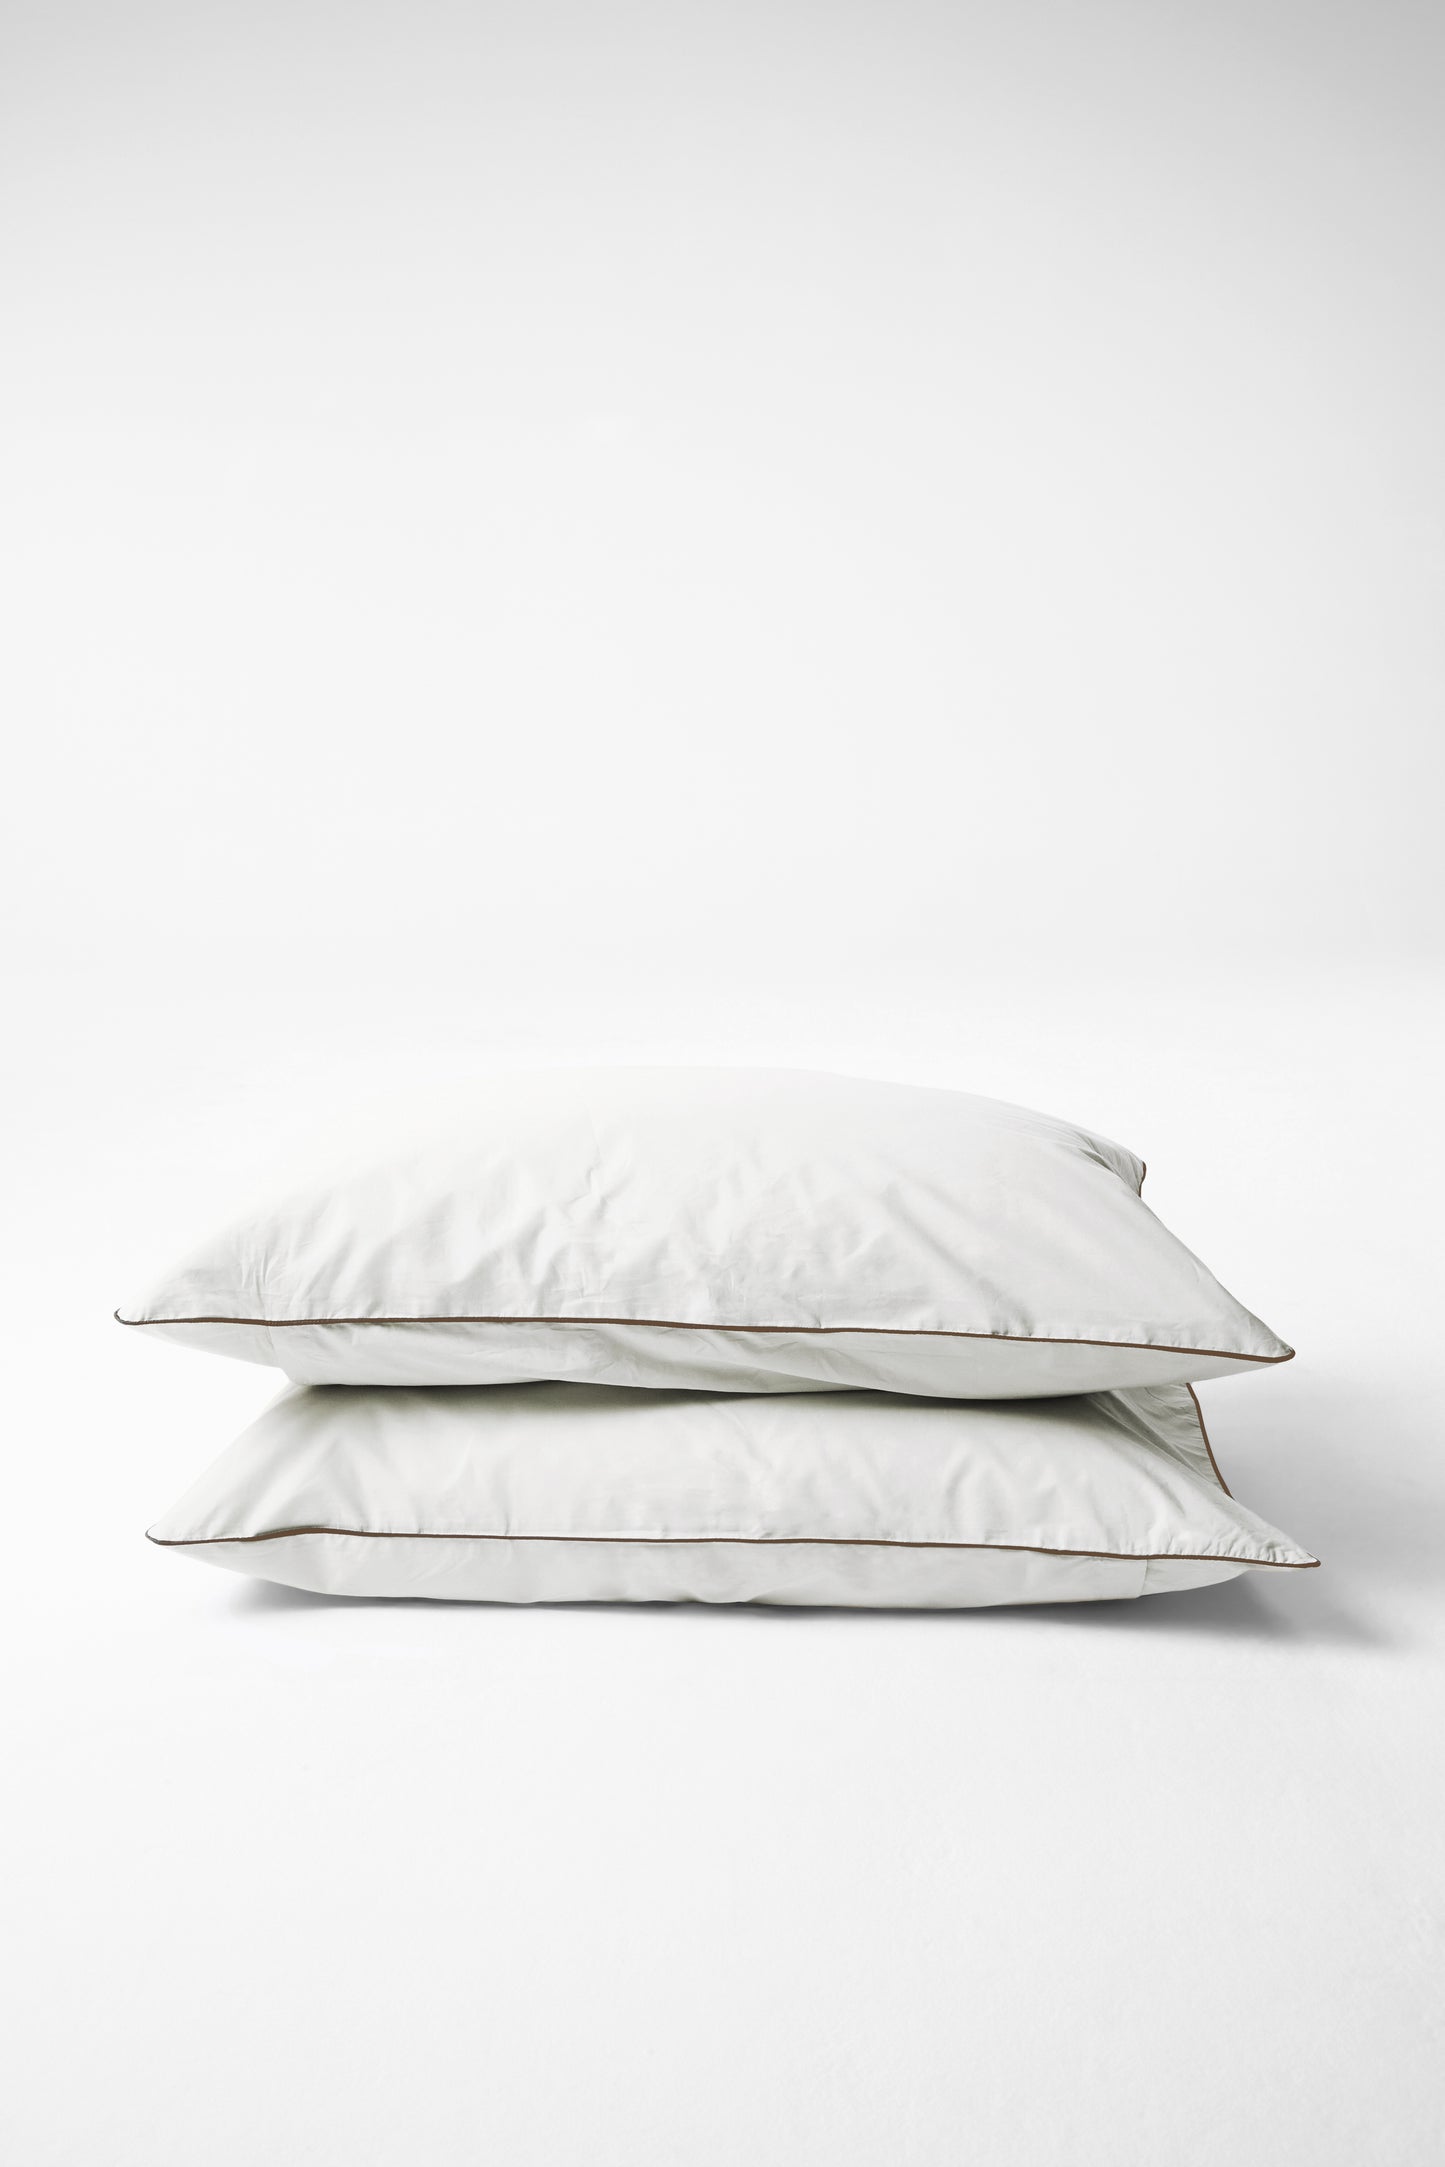 Pillowcase Pair in Contrast Edge, Prism with Carob